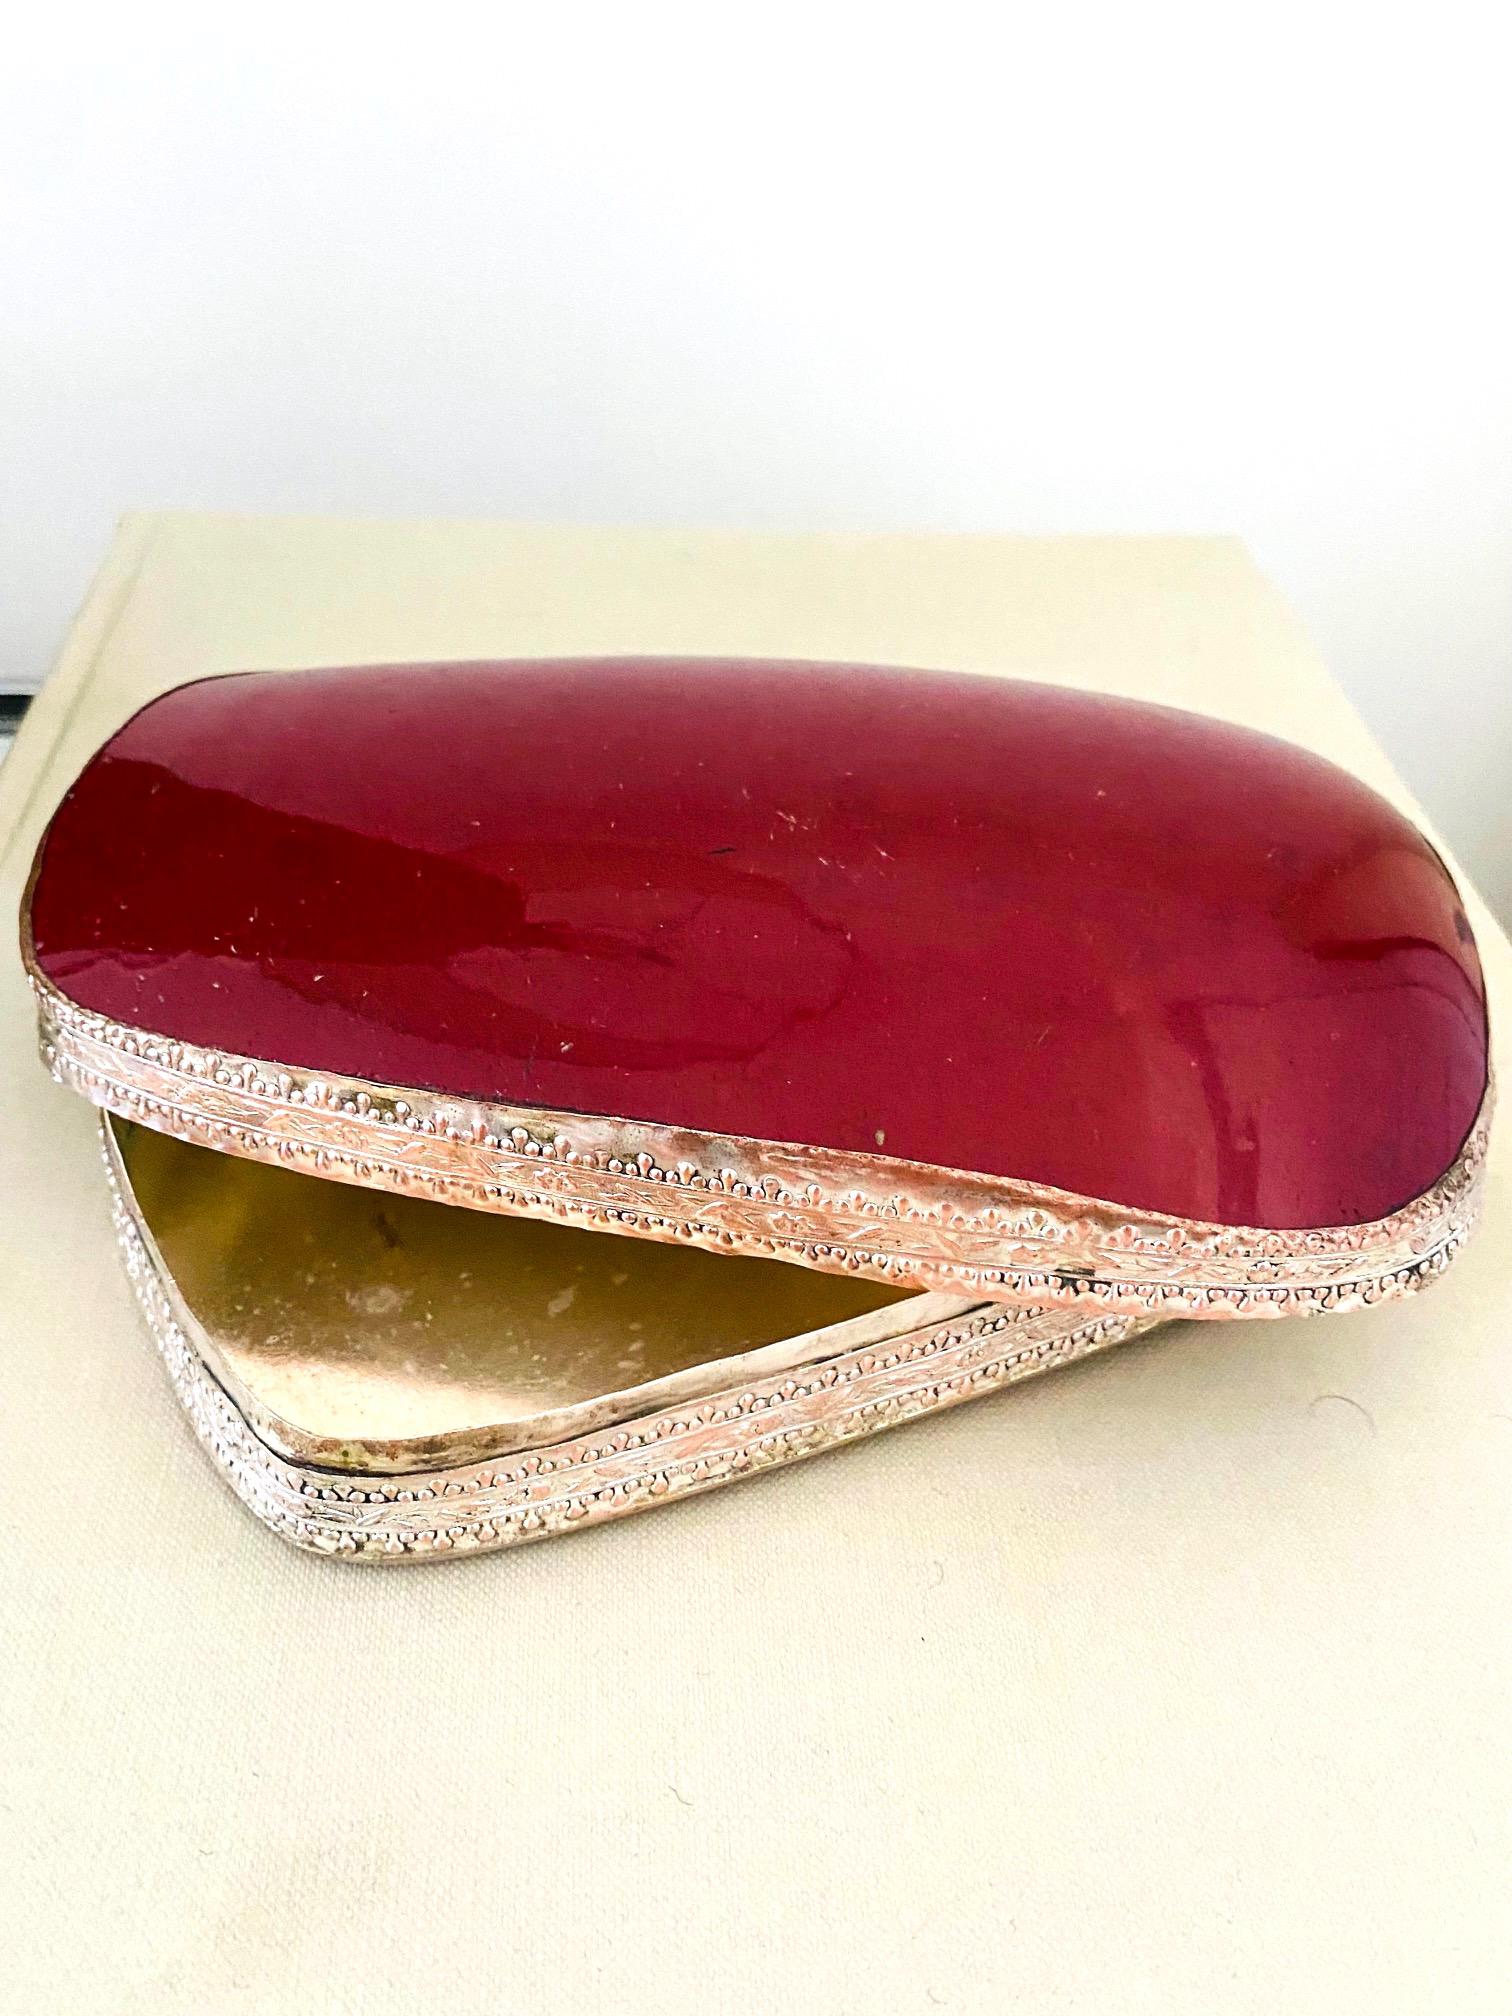 Silver Plate Silver Trinket Box with Antique Oxblood Porcelain Inset, Chinese circa 1945